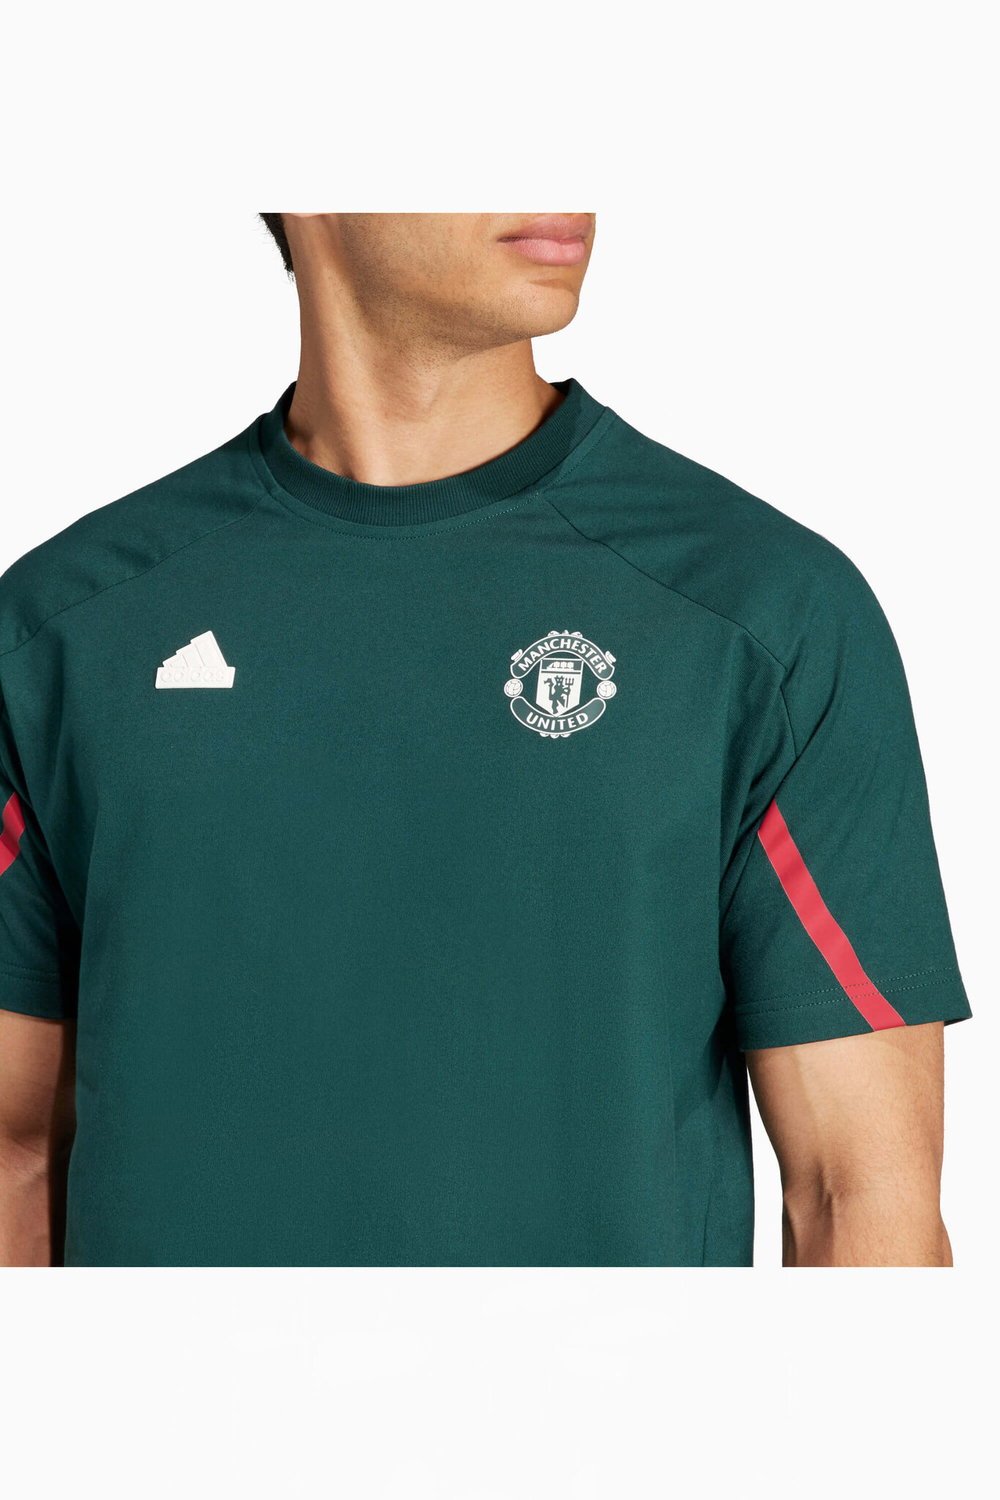 Футболка adidas Manchester United 23/24 Designed For Gameday